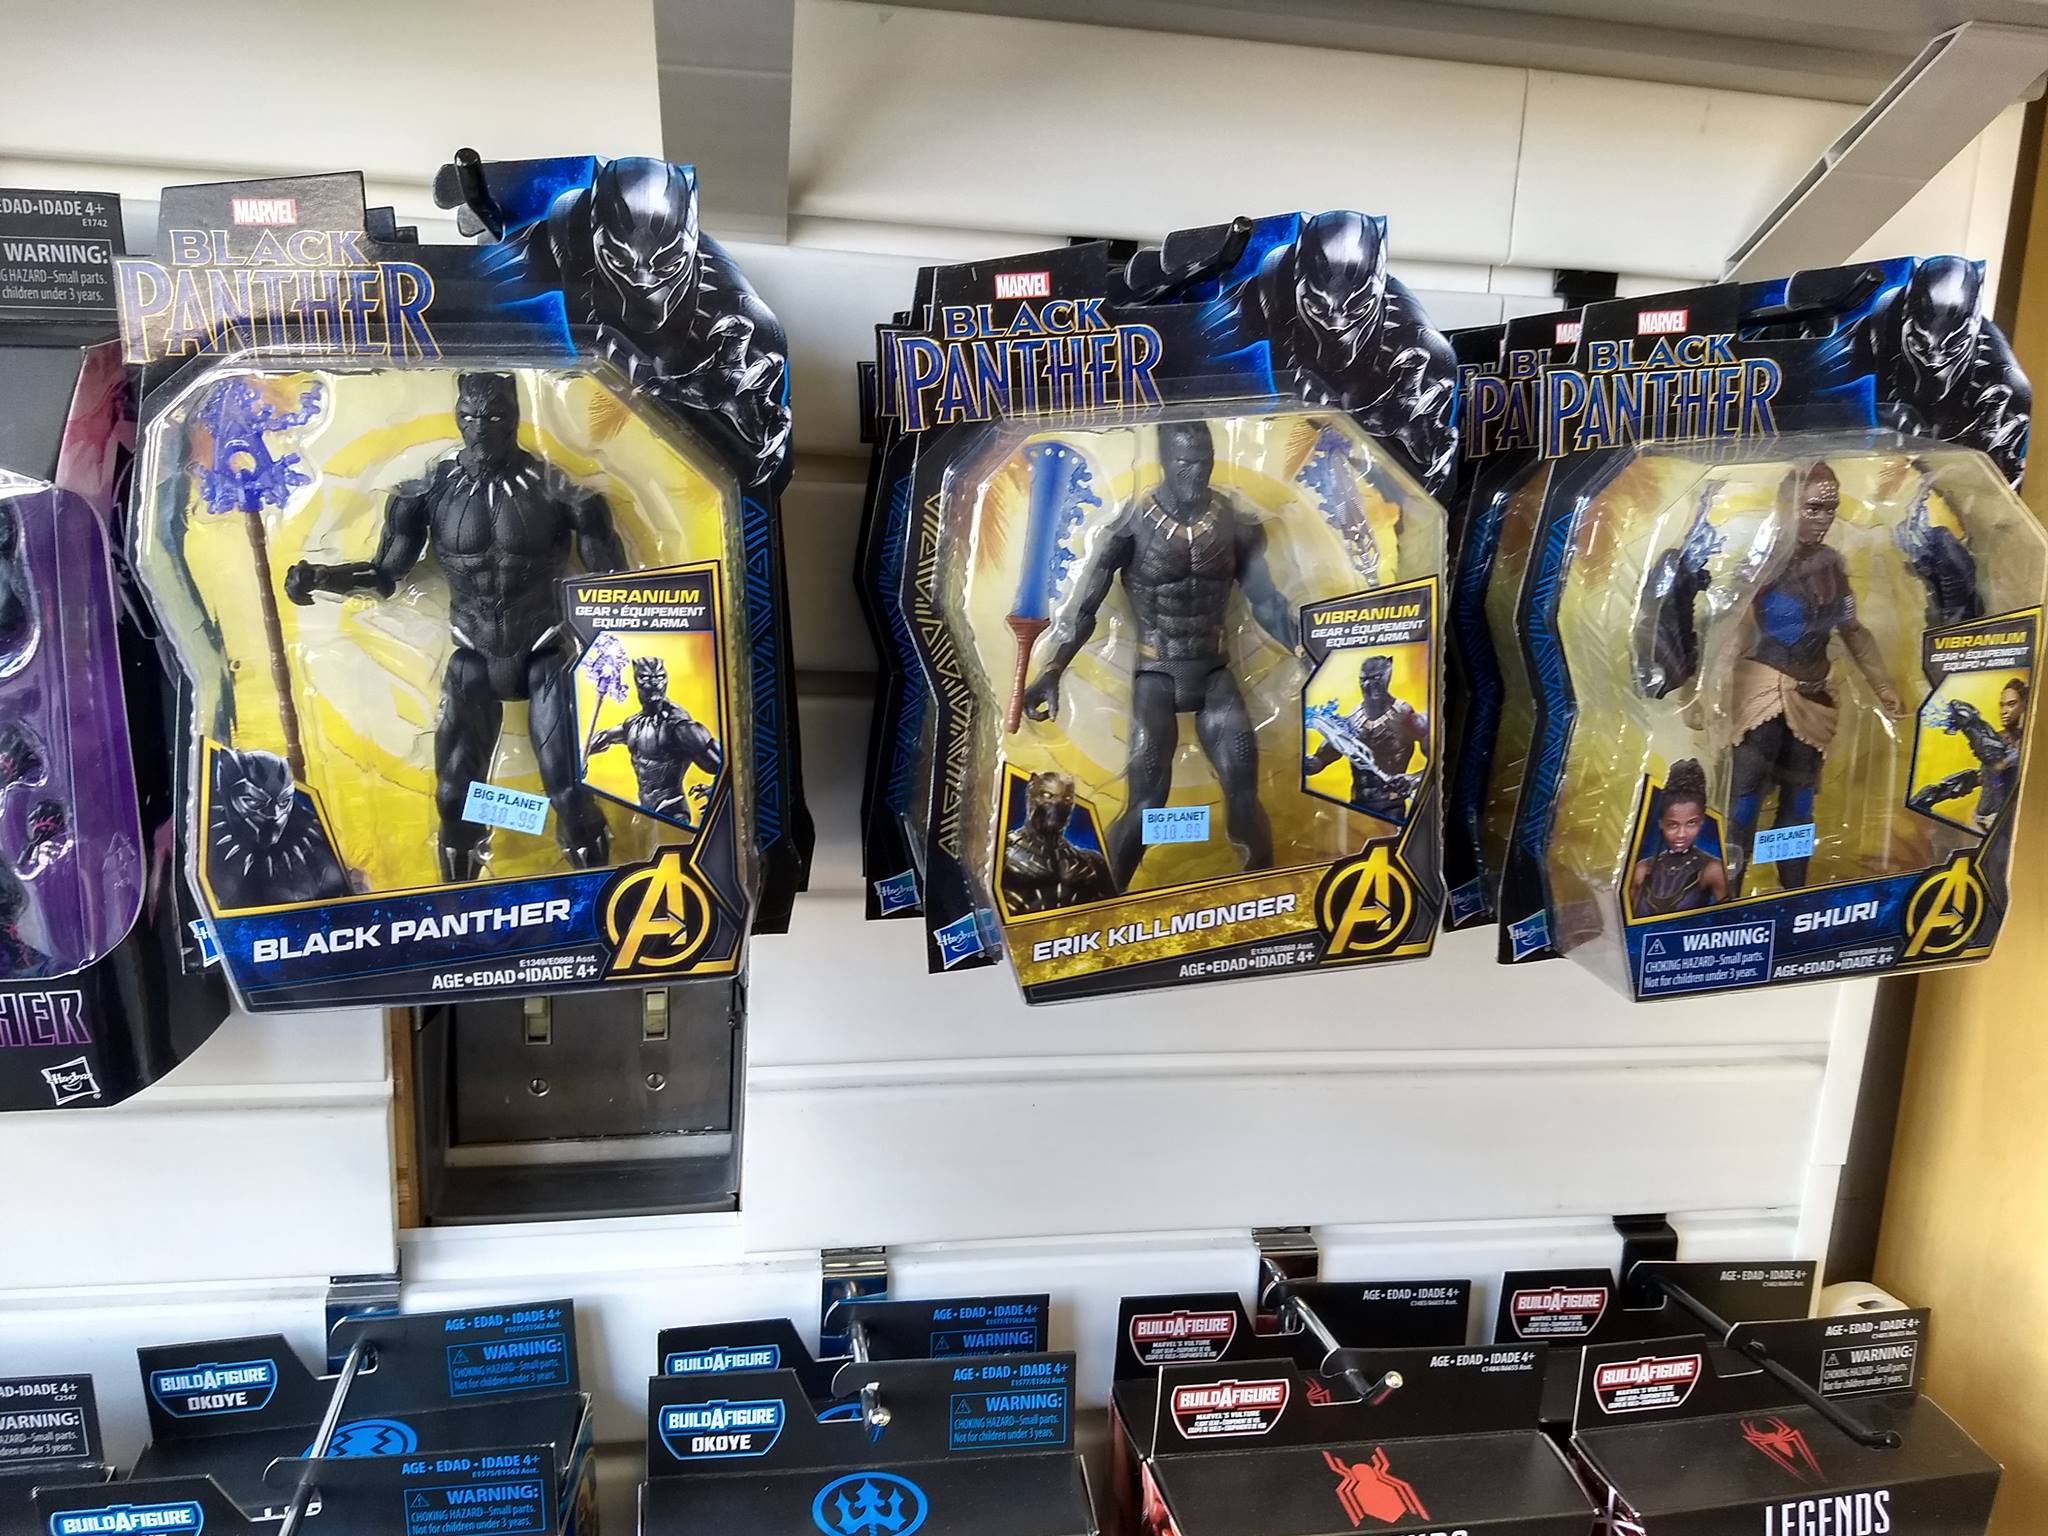 Black Panther Toys Have Been Found!